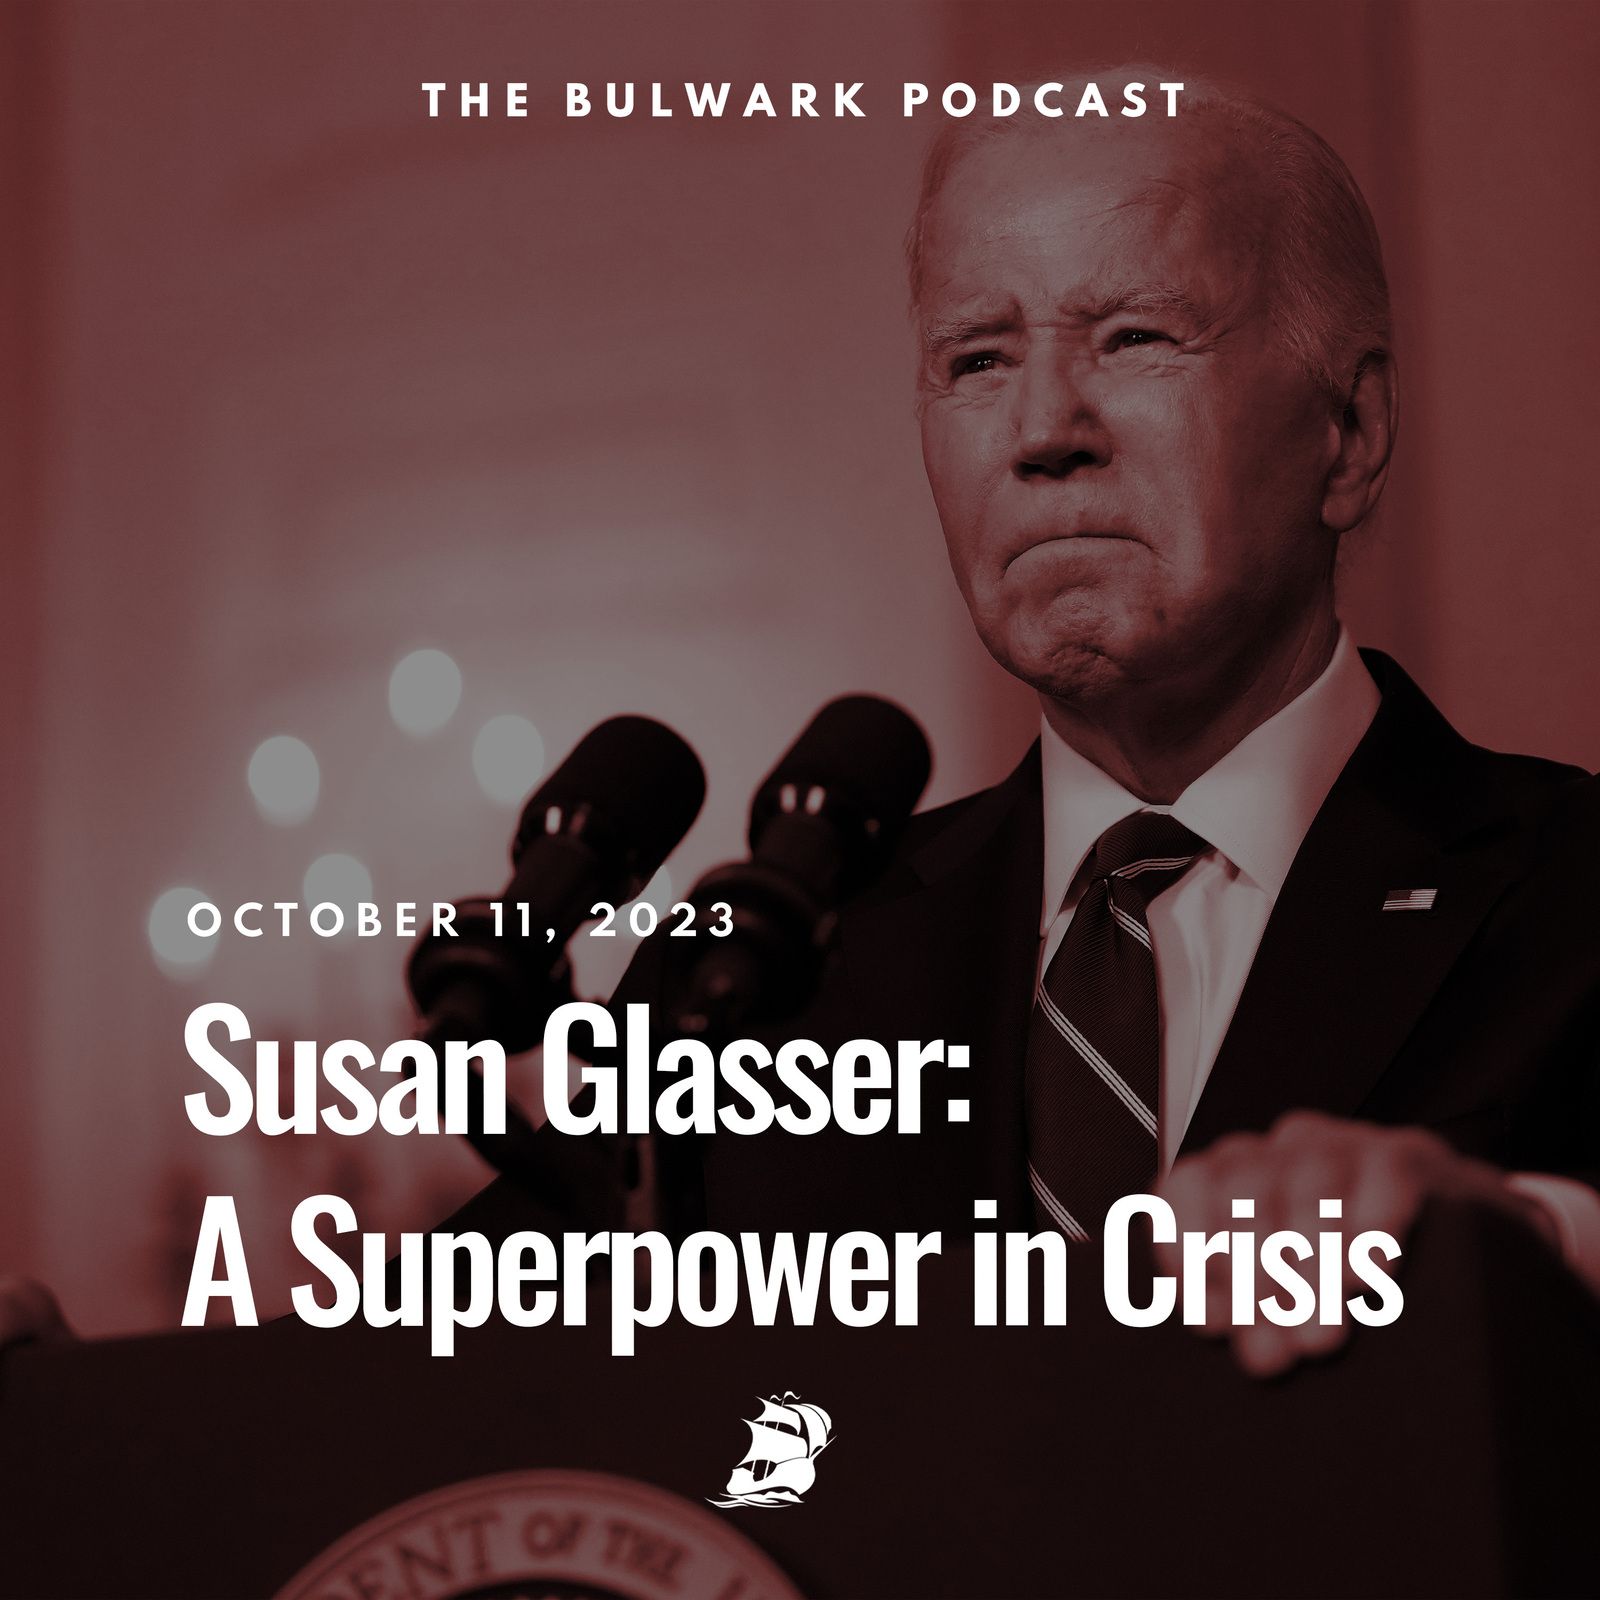 Susan Glasser: A Superpower in Crisis by The Bulwark Podcast